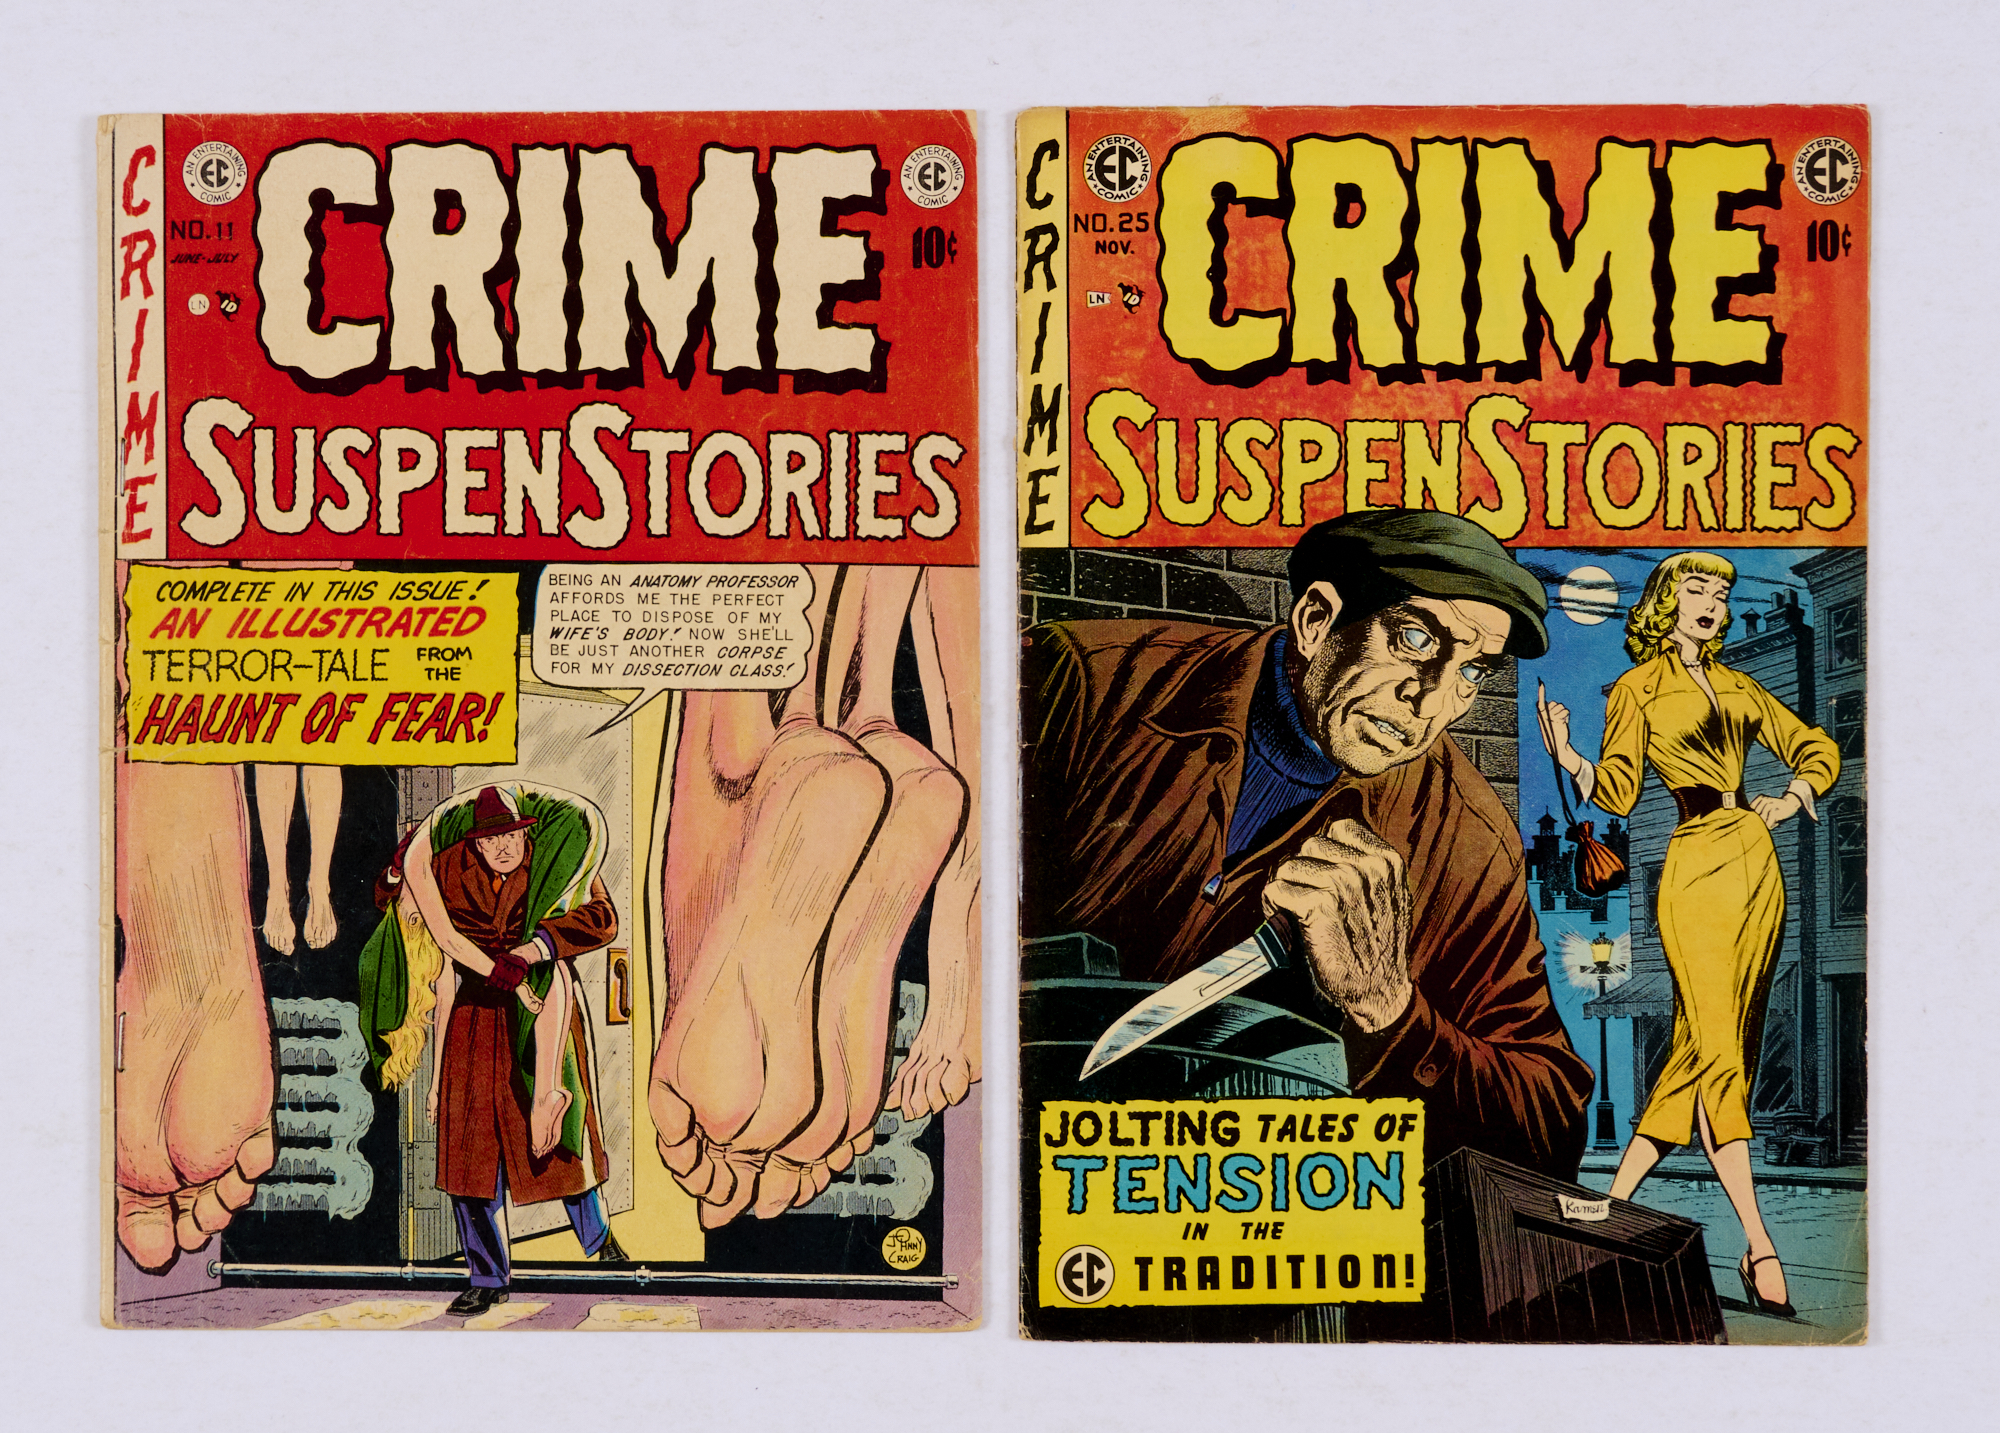 Crime SuspenStories (1952-53) 11, 25. # 11 [vg+], 25: top staple removed, interior pages neatly